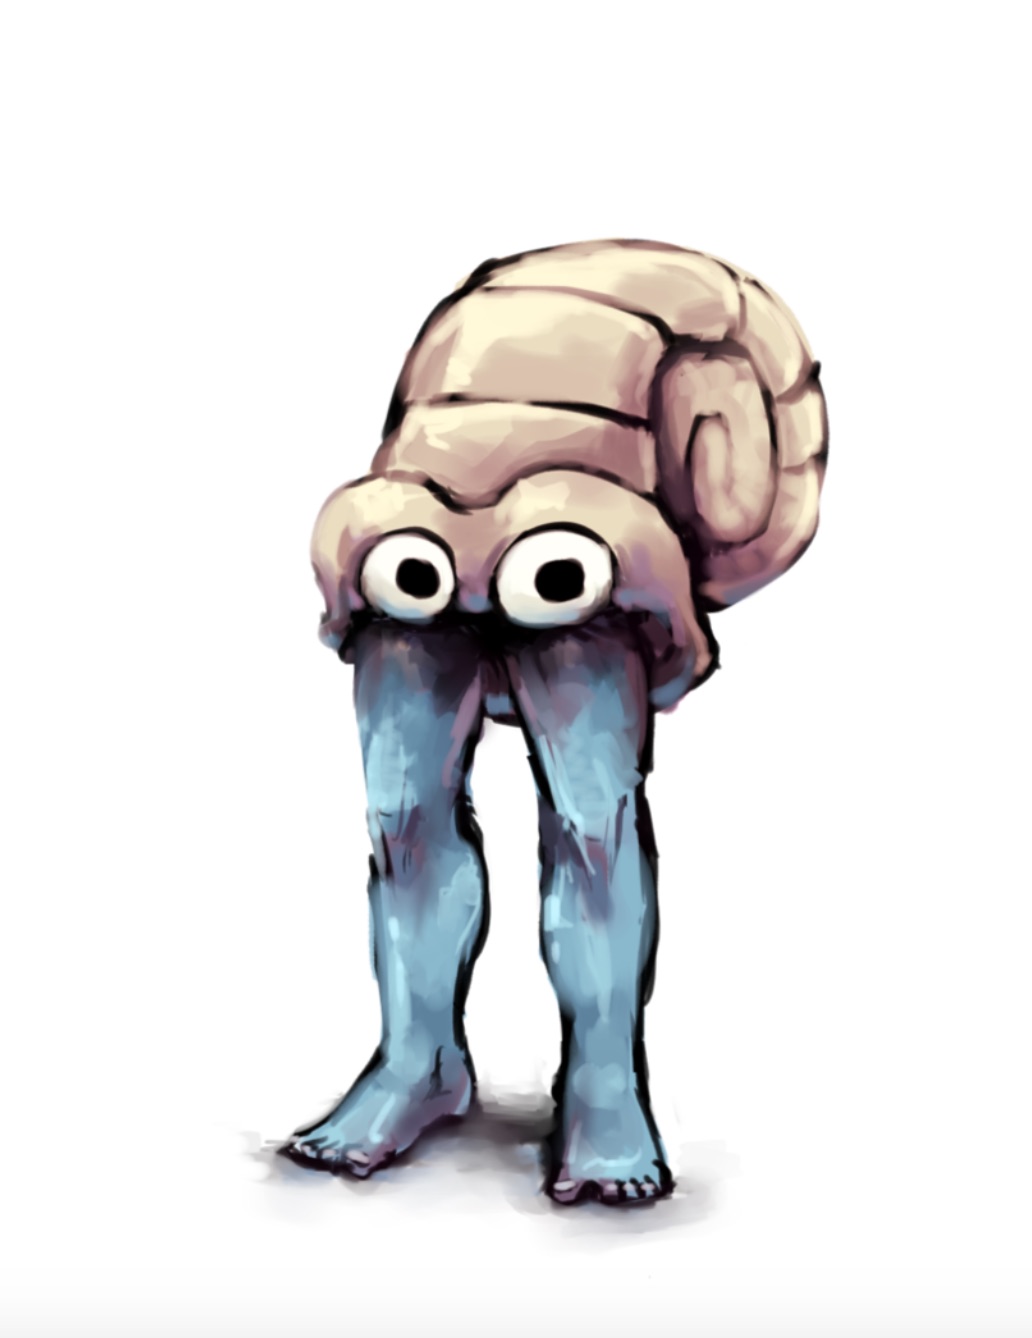 Fear the Omanyte!